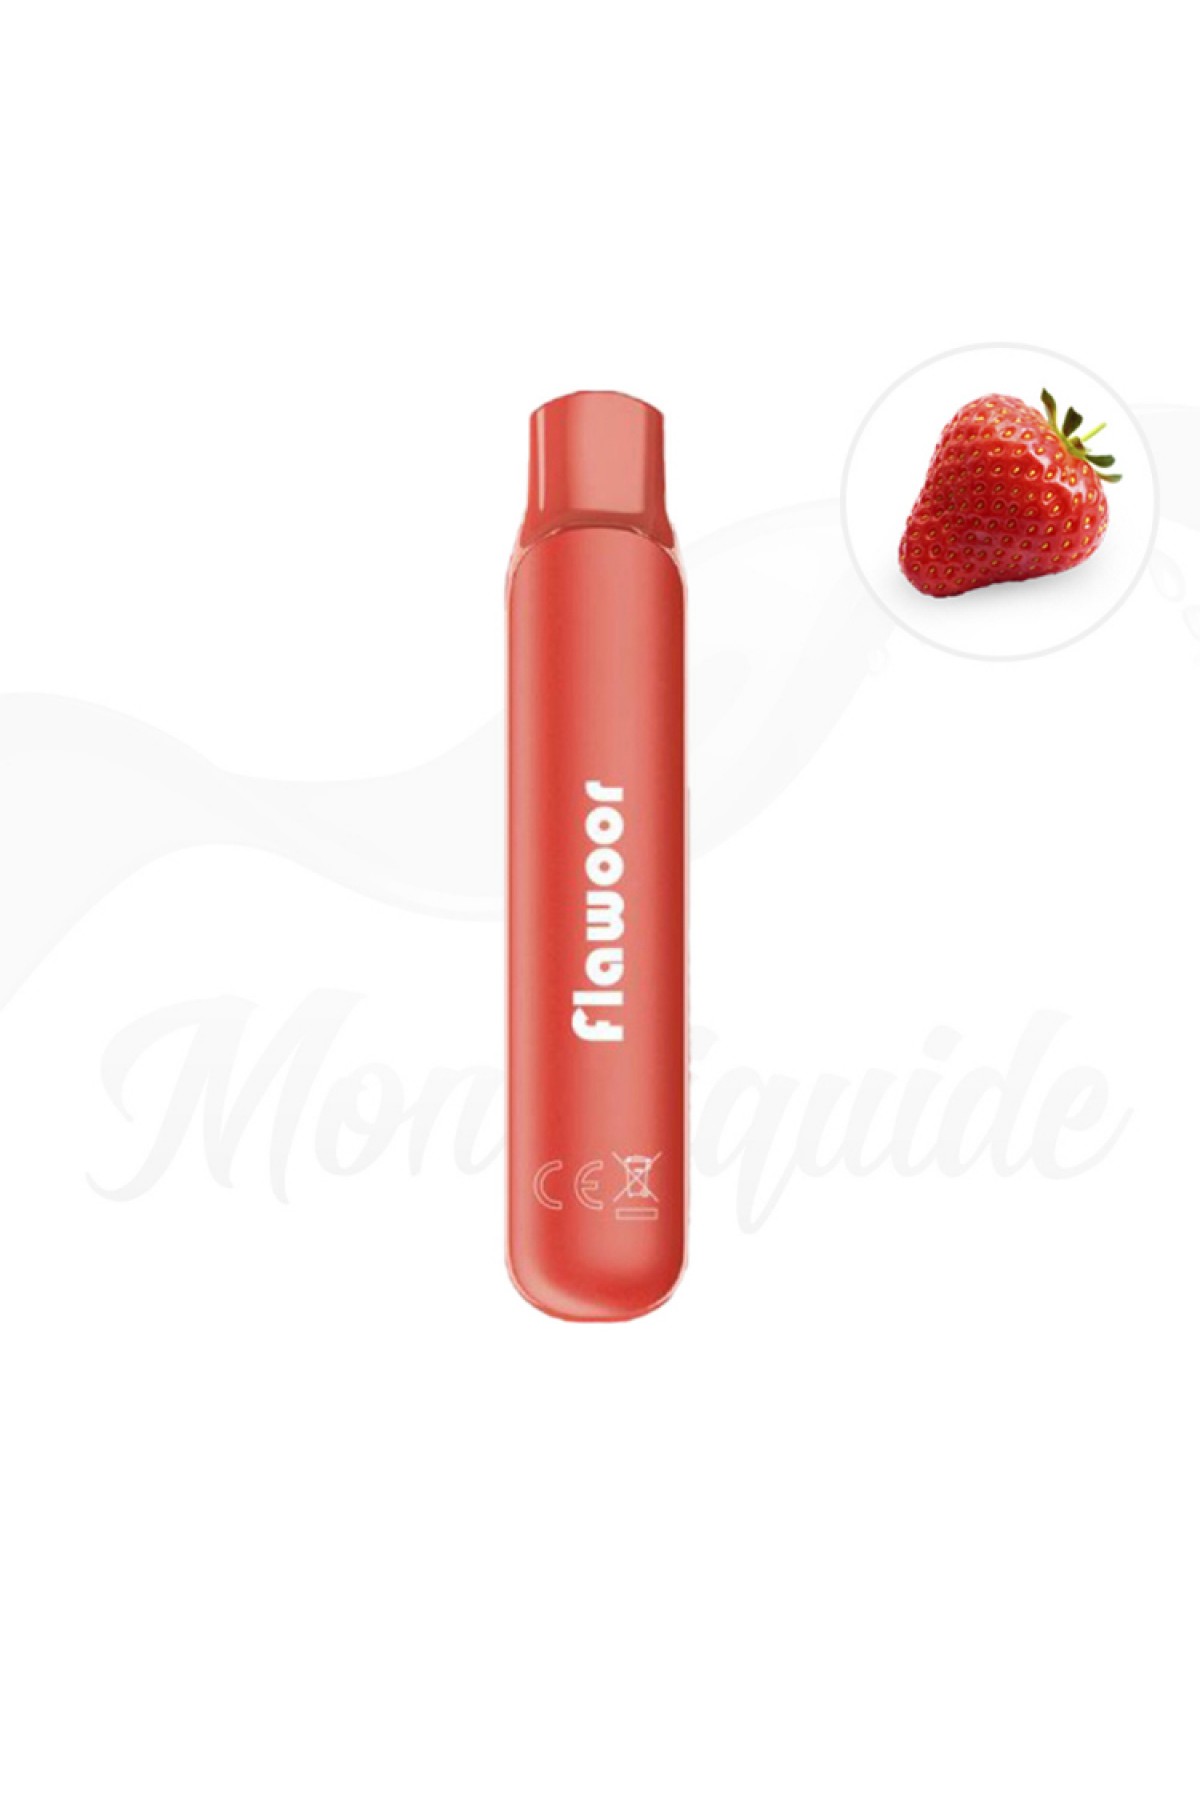 Flawoor Mate - Fraise Explosion 600 Puff Kit